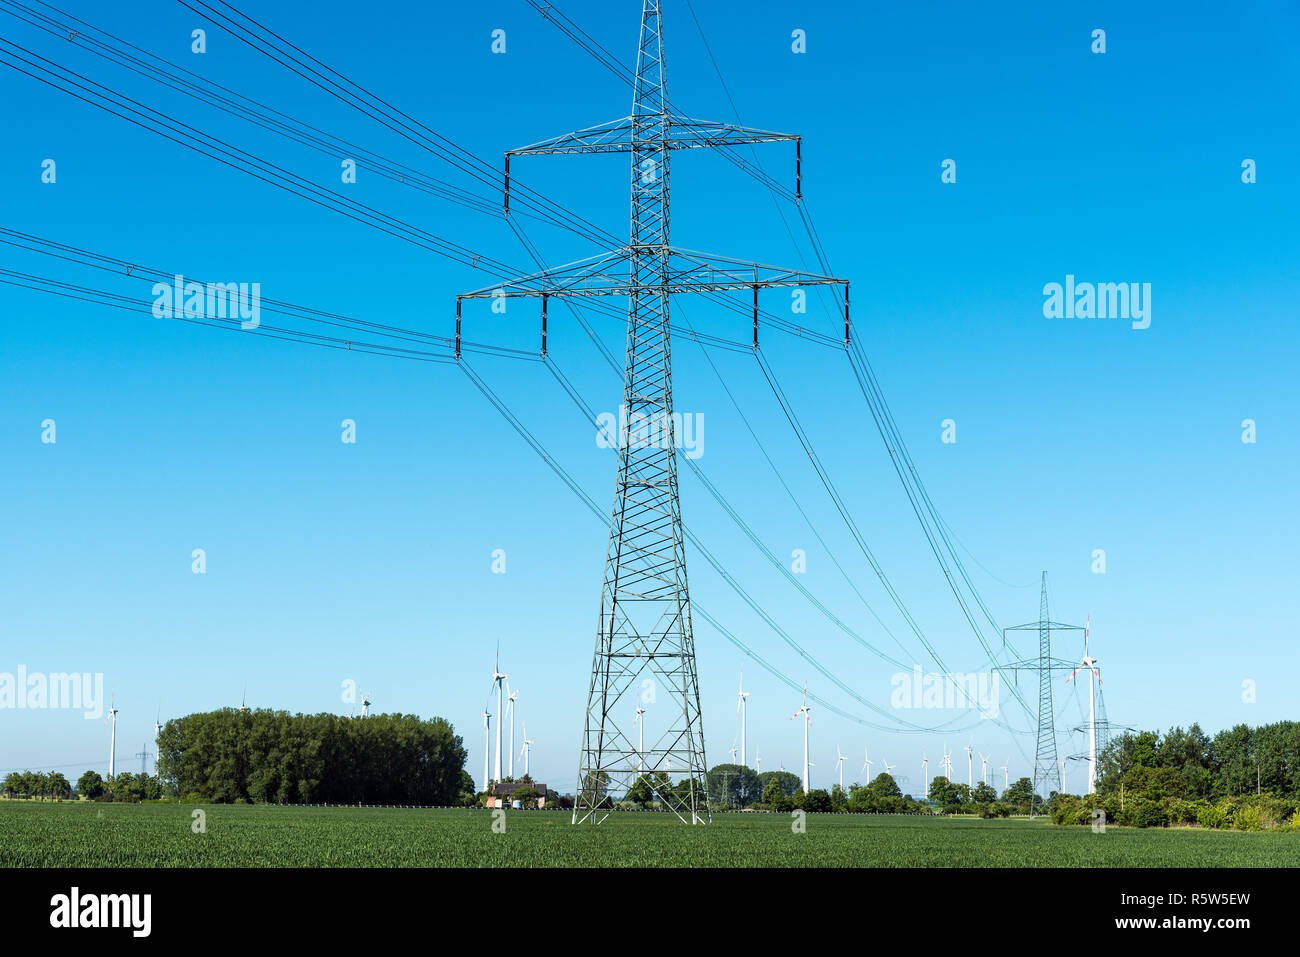 electricity pylons and transmission lines in germany Stock Photo